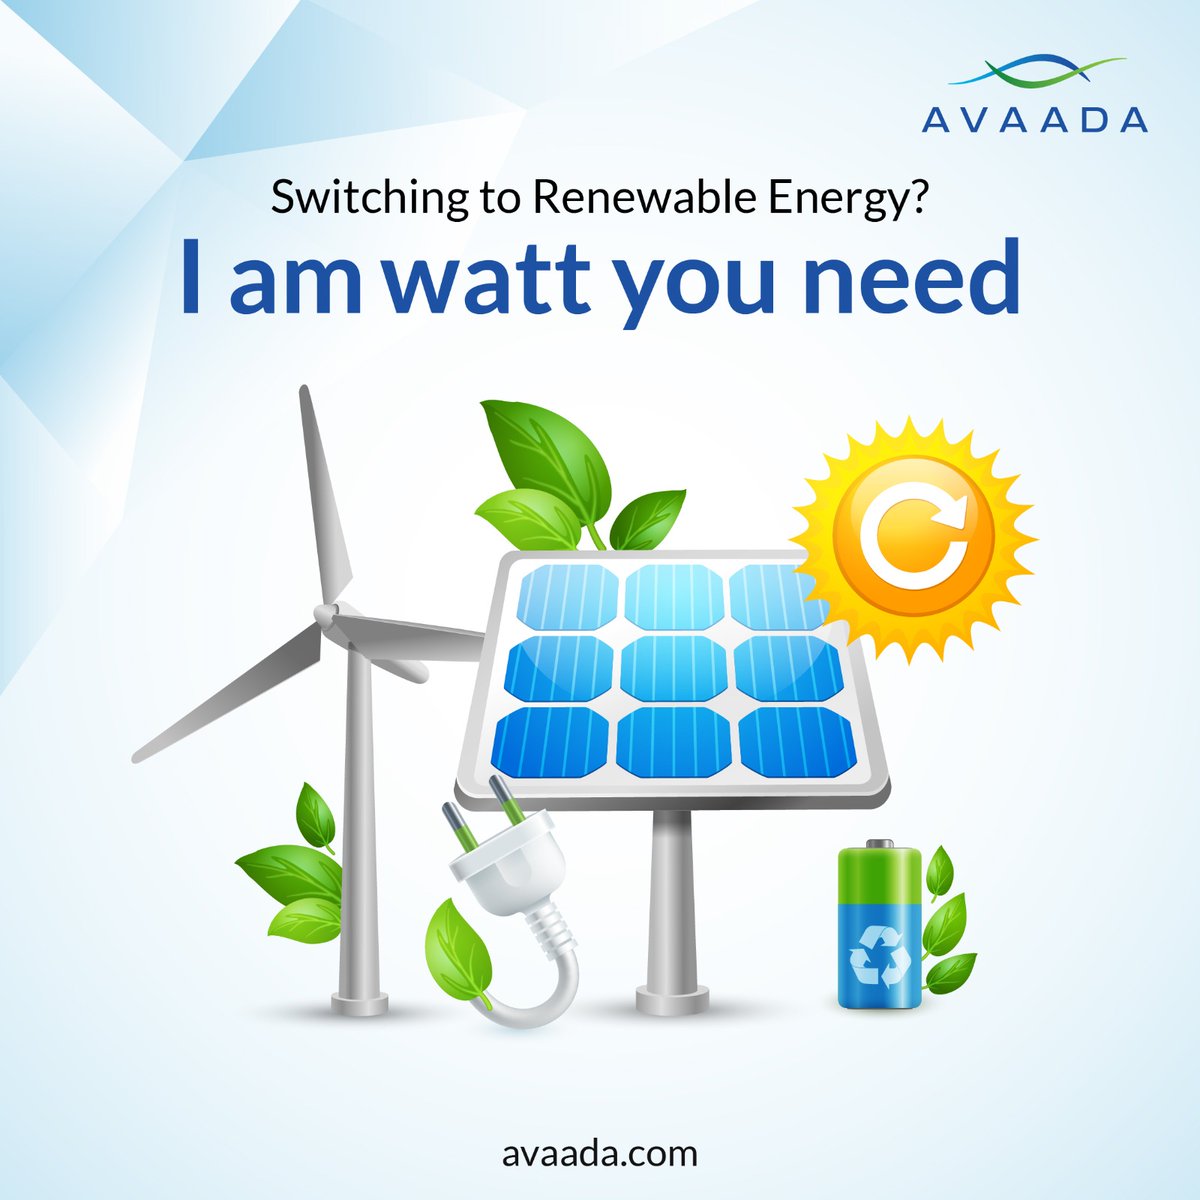 Power up with renewables – We are watt you need!

Click to know more: tinyurl.com/3z79u3hc

#AvaadaGroup #AvaadaPuns #RenewableEnergy #MakeTheSwitch